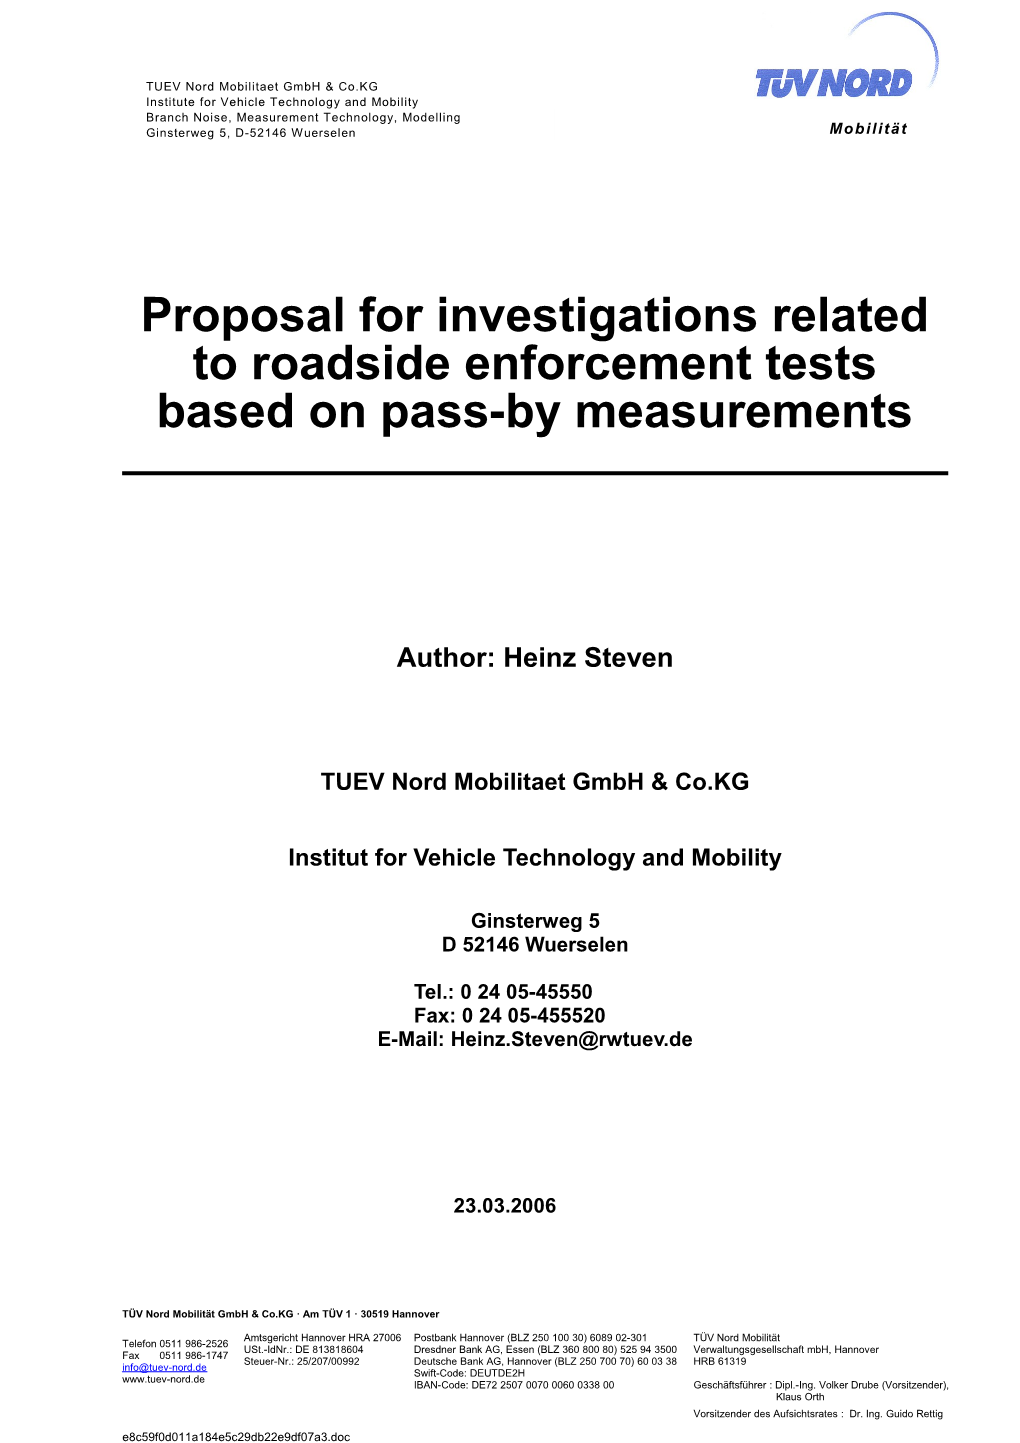 Proposal for Investigations Related to Roadside Enforcement Tests Based on Pass-By Measurements